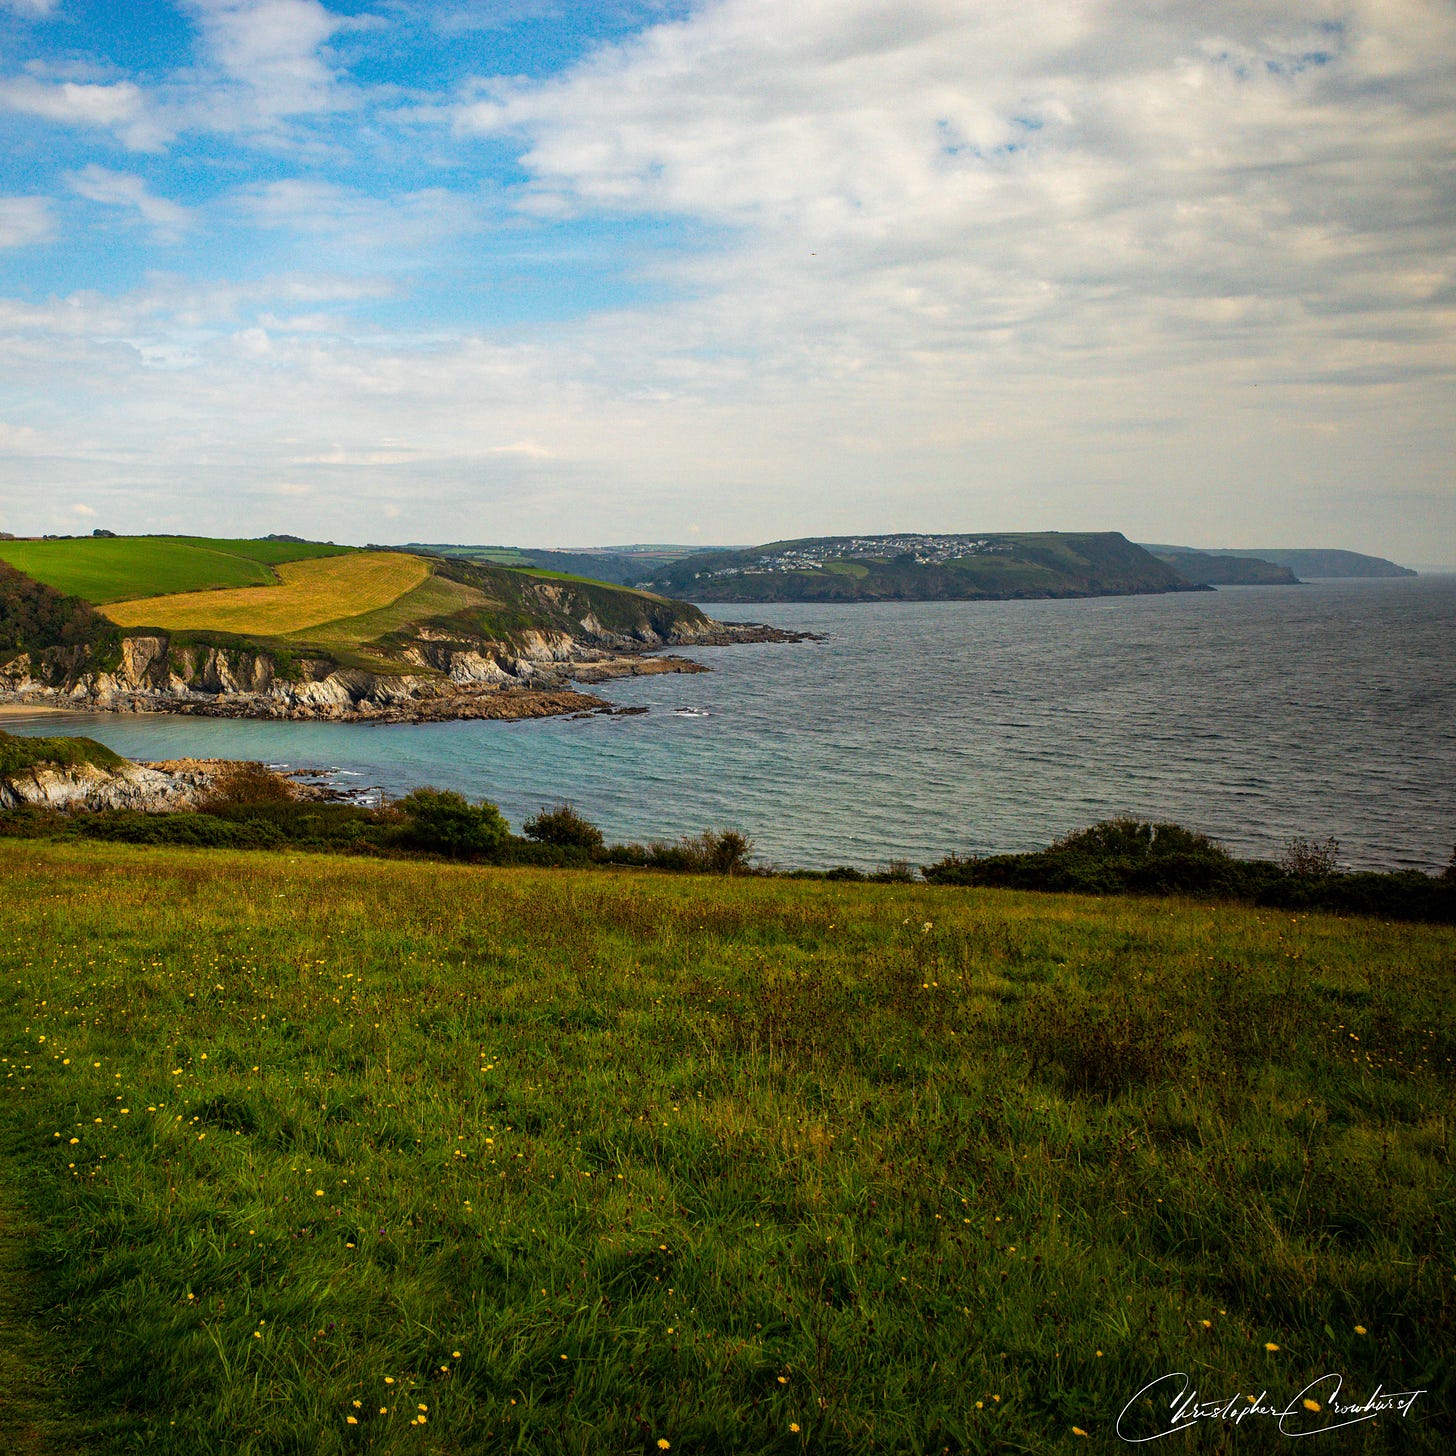 The mouth of the Fowey River estuary viewed from the Southwest Coastal path, shwoing the sea, and green field and cliffs in the distance.